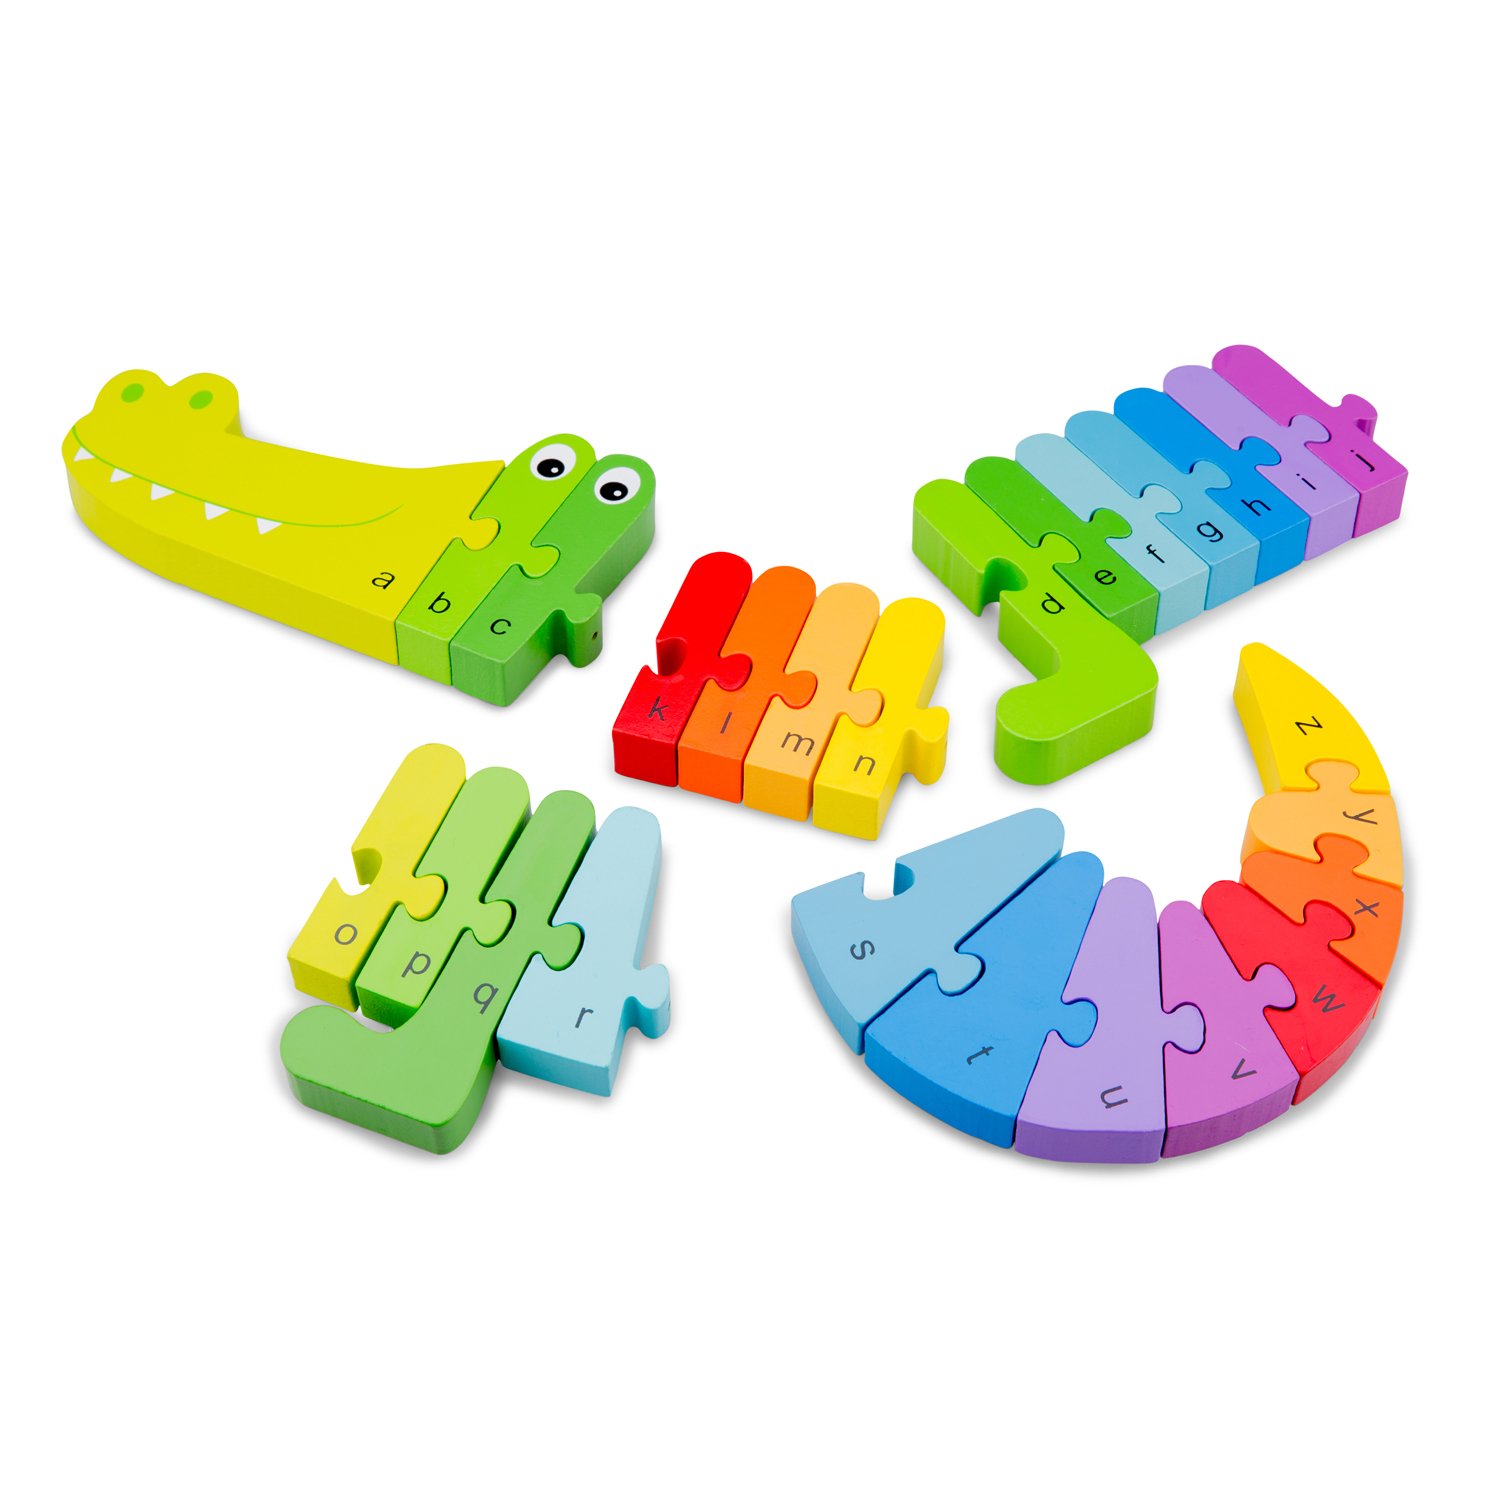 New Classic Toys Alphabet Puzzle Crocodile Educational Wooden Toys for 3 Year Old Boy and Girl Toddlers Learn The Alphabet